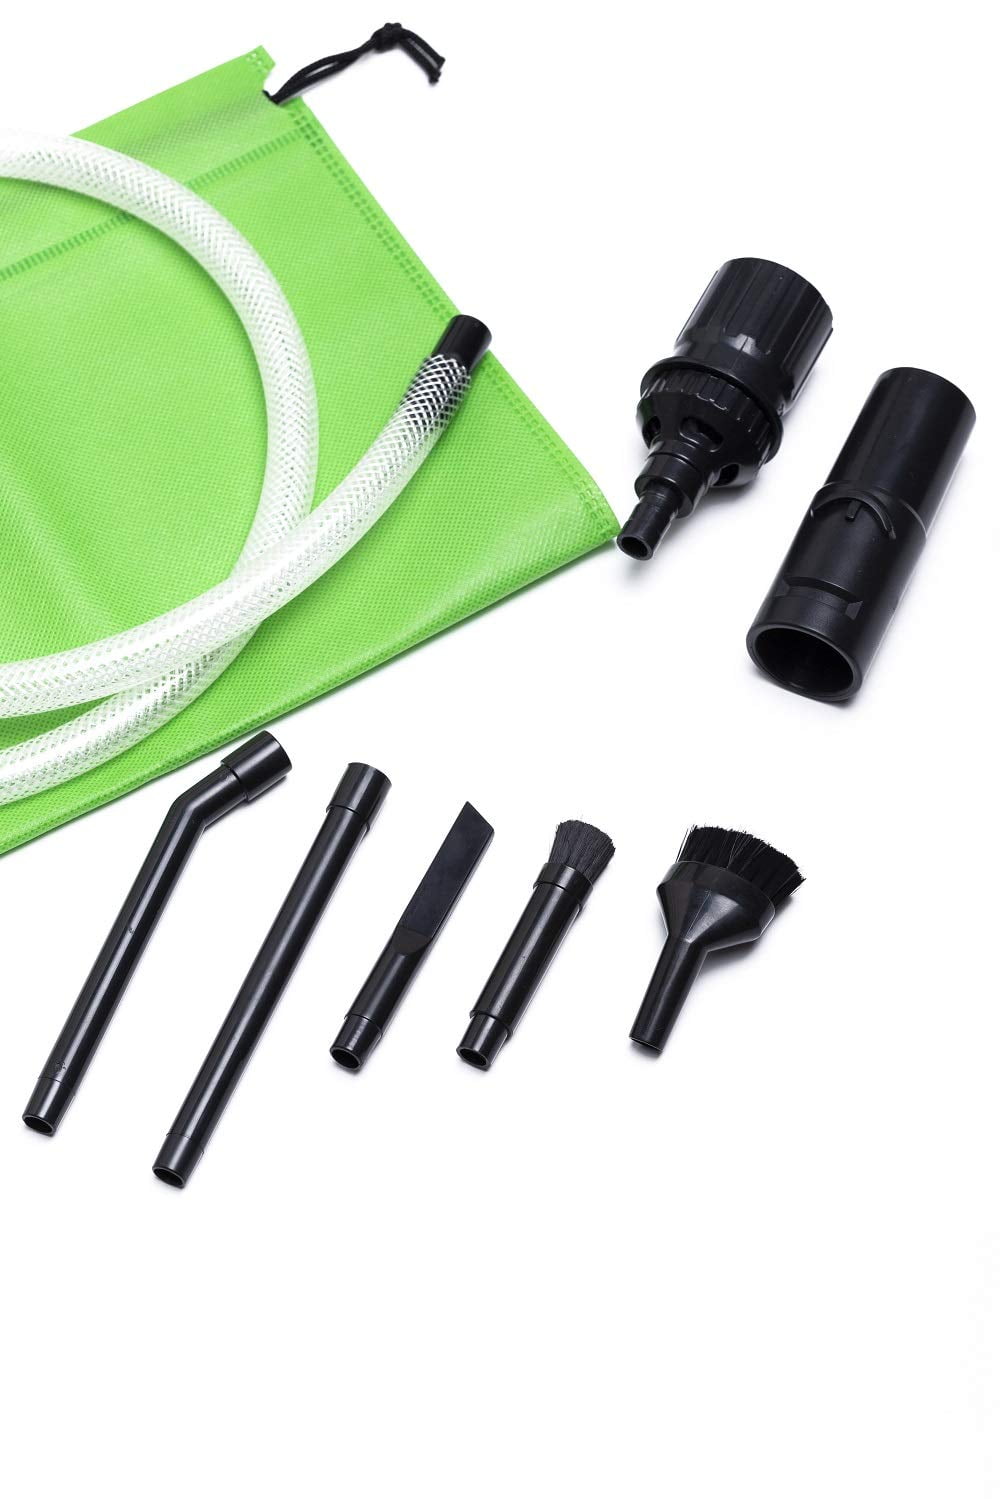 Green Label Micro Vacuum Accessory Kit for Dyson Vacuum Cleaners